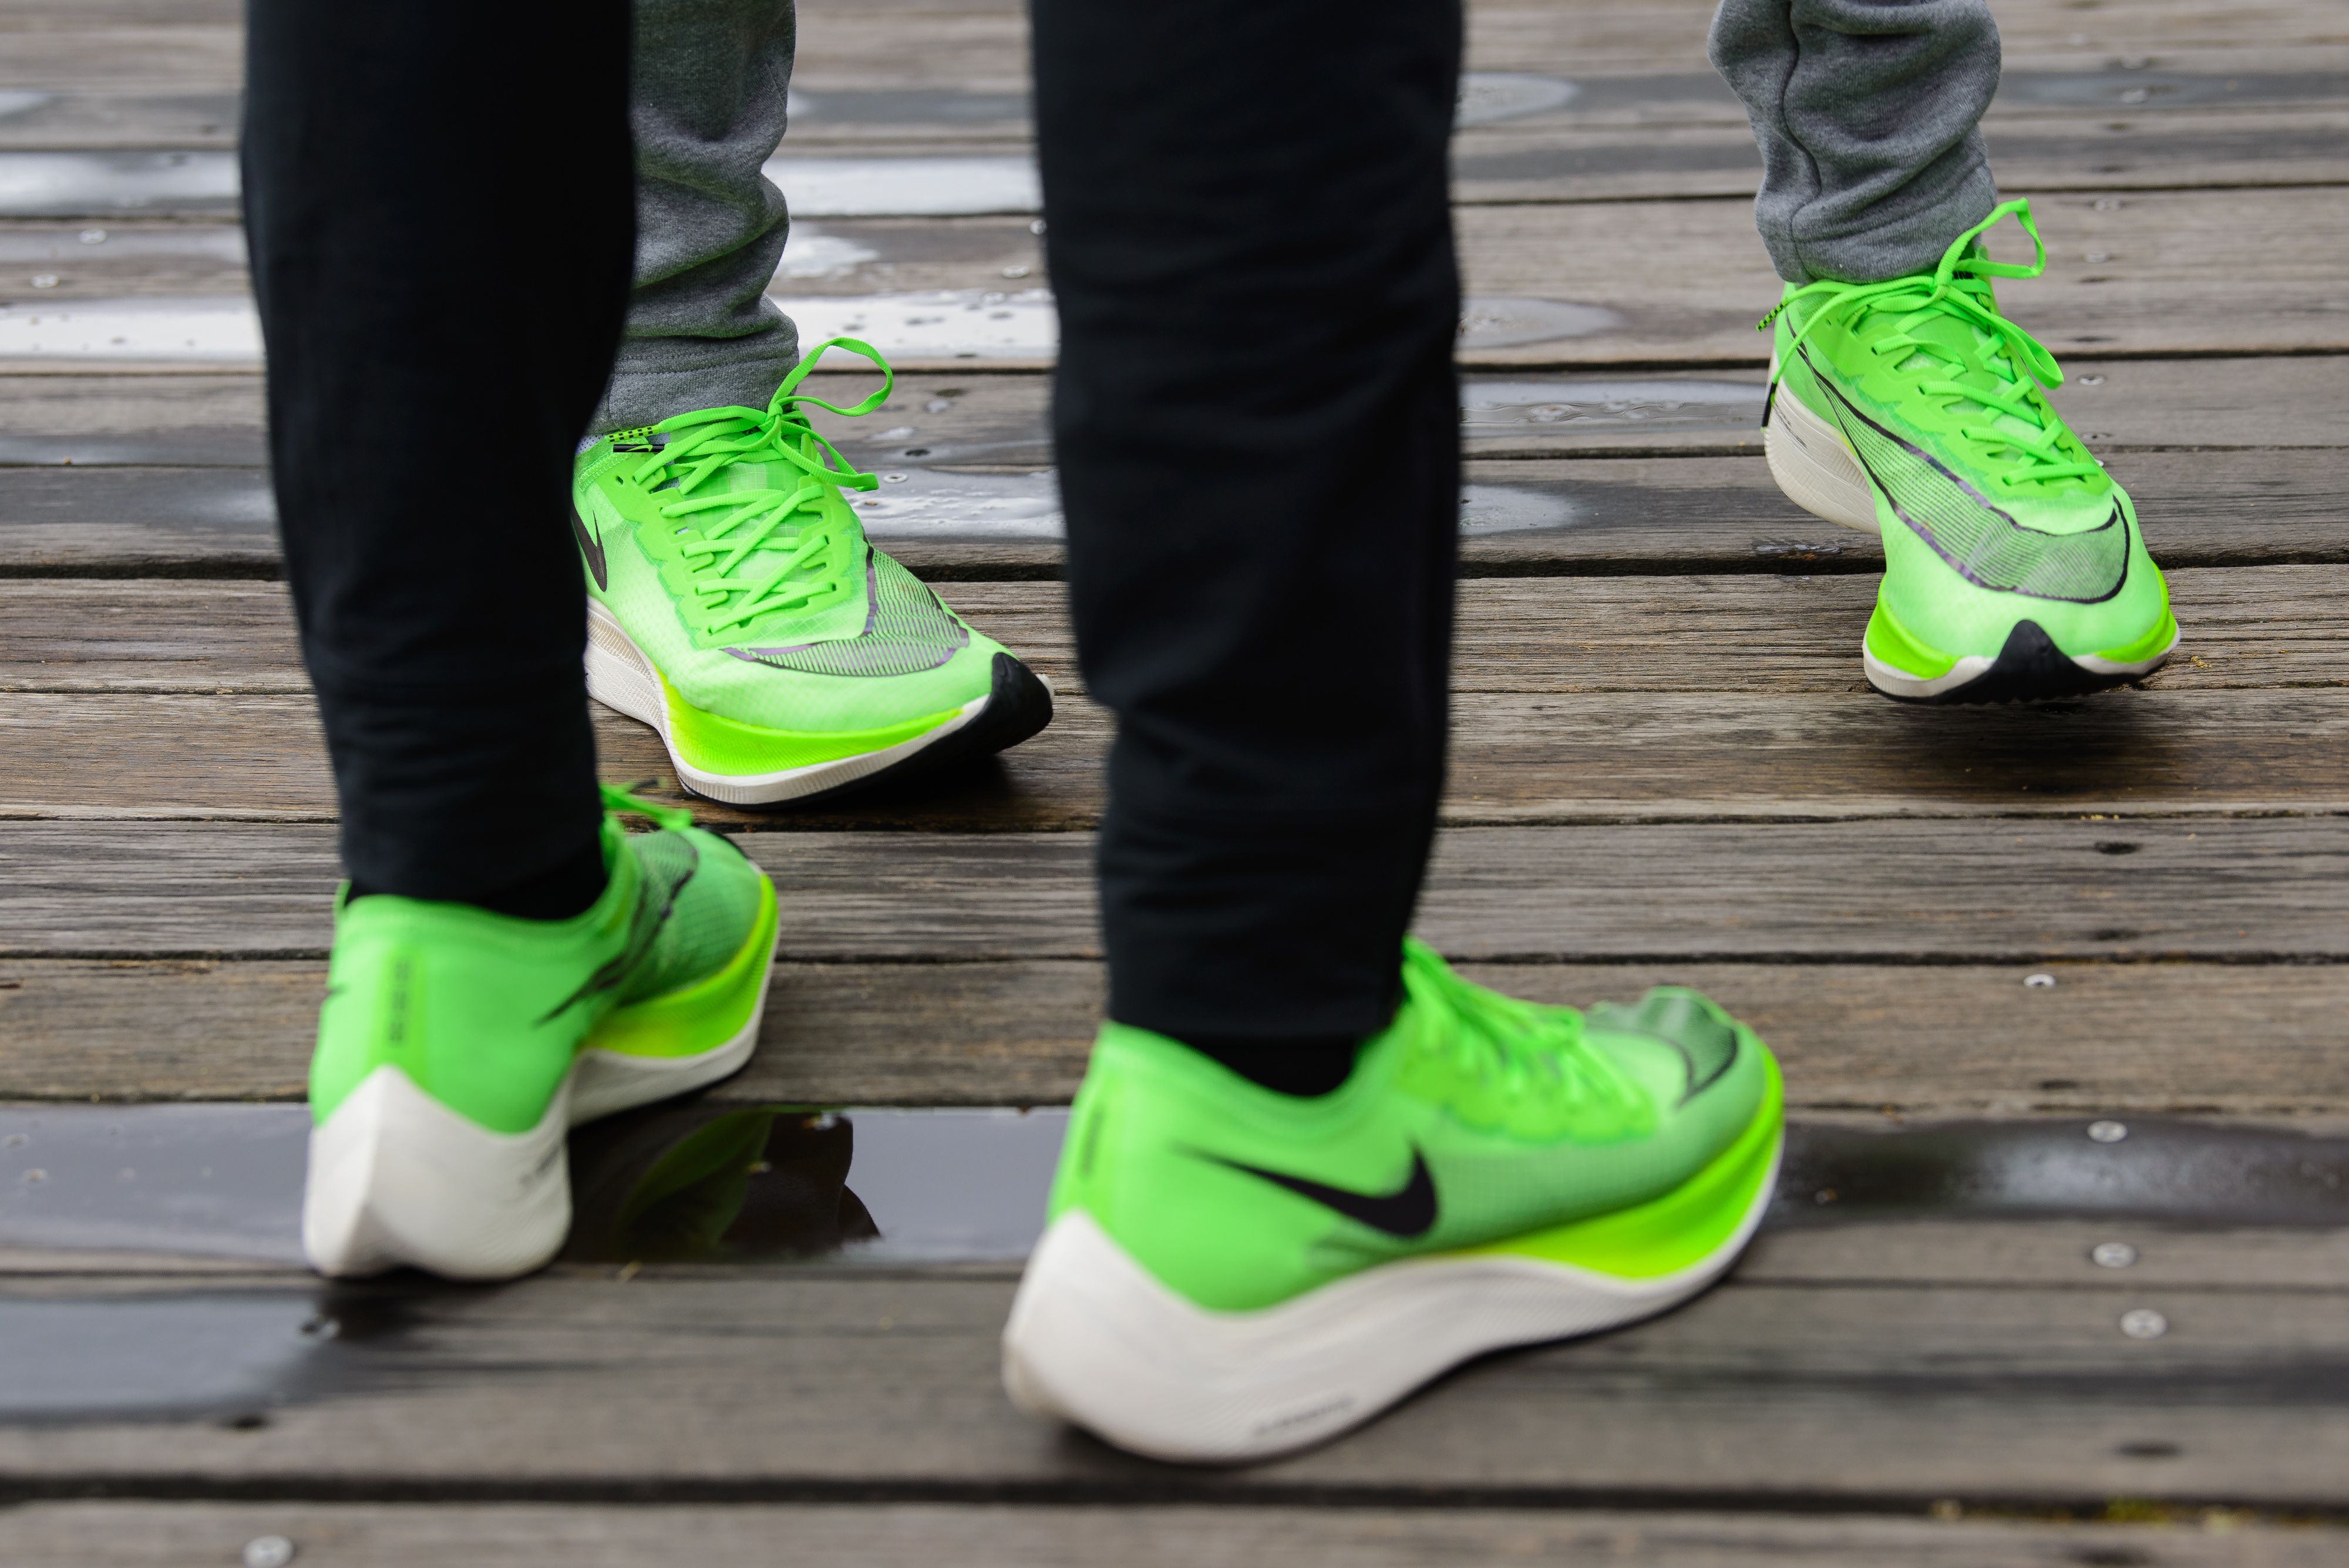 Plunderen hart hoofd Nike Vaporfly Shoe Ban - World Athletics Announces New Rules for Footwear